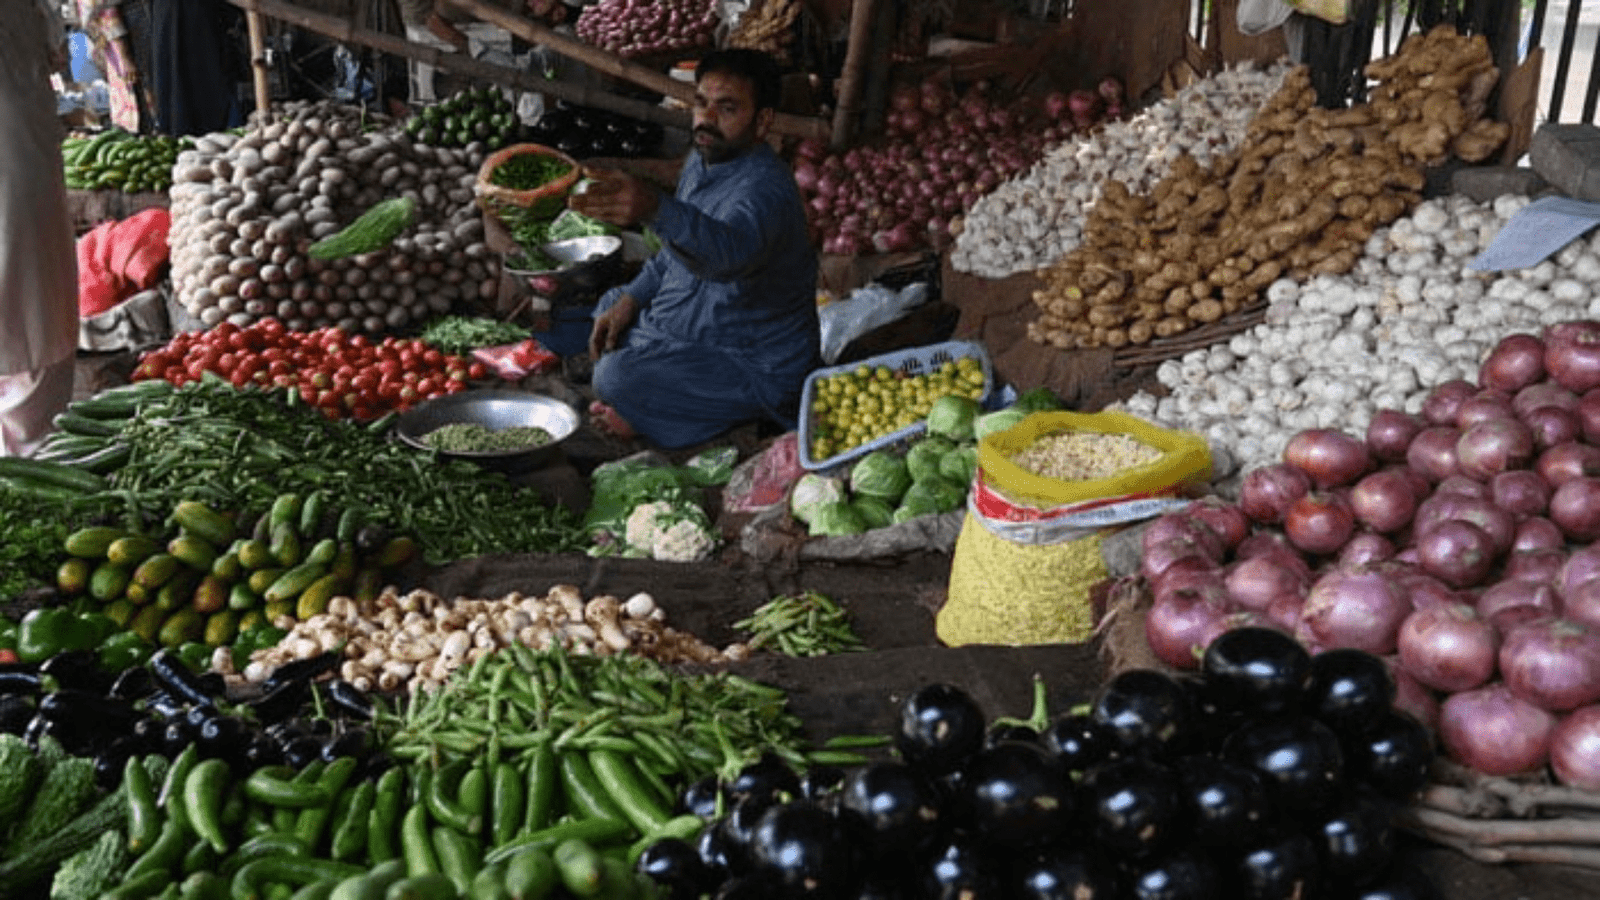 Pakistan’s weekly inflation rate shows promising decline